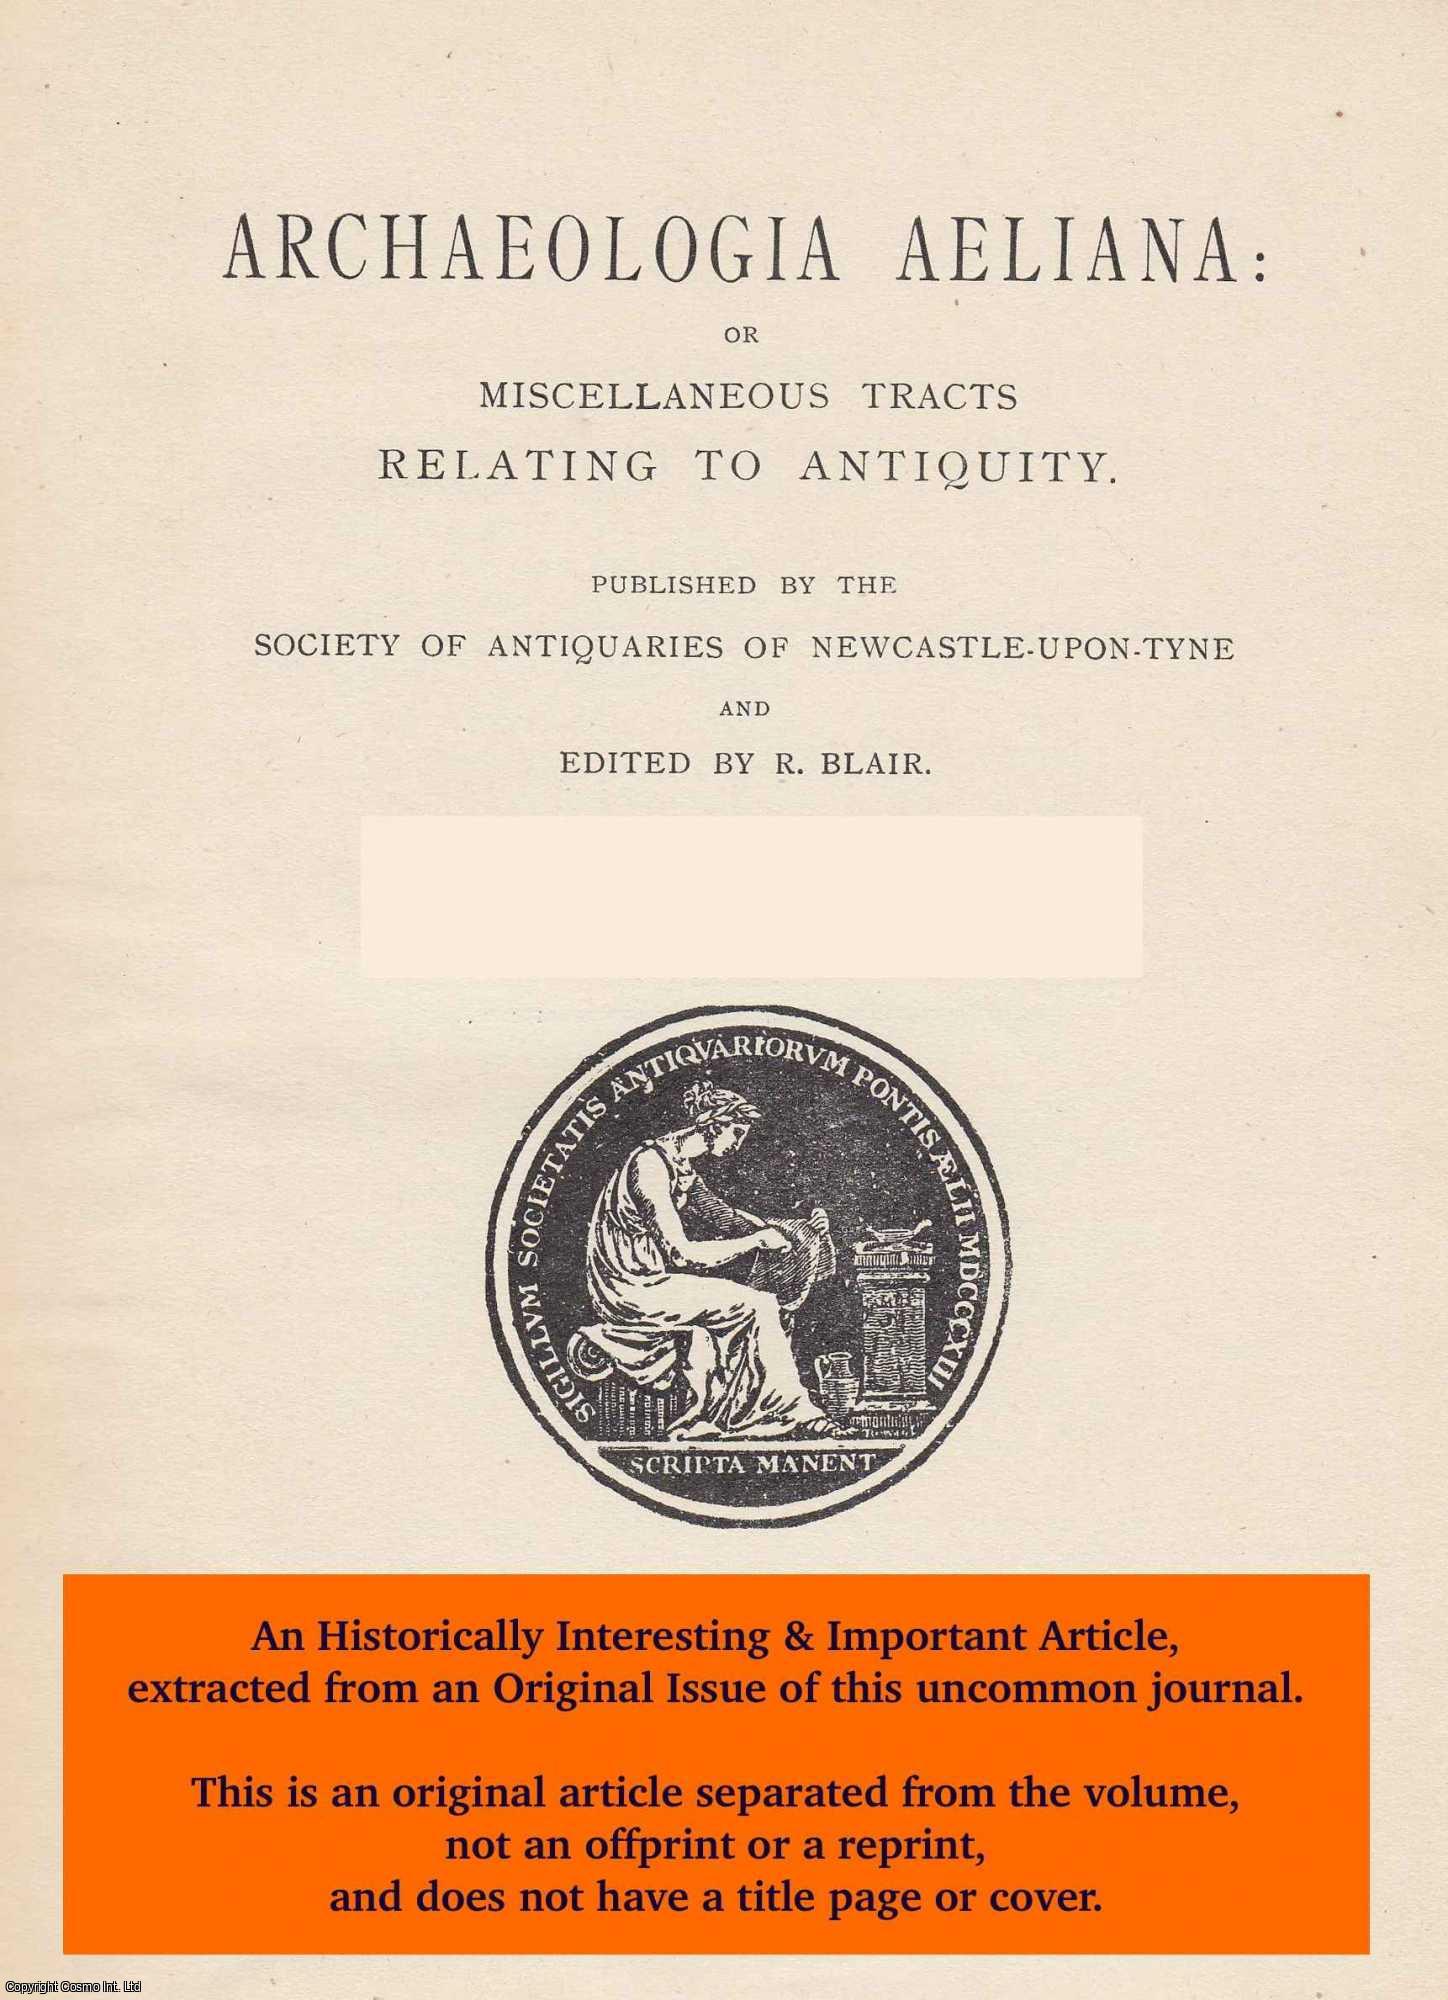 W. E. Hume - The Origin and Early History of The Infirmary of Newcastle Upon Tyne. An original article from The Archaeologia Aeliana: or Miscellaneous Tracts Relating to Antiquity, 1954.